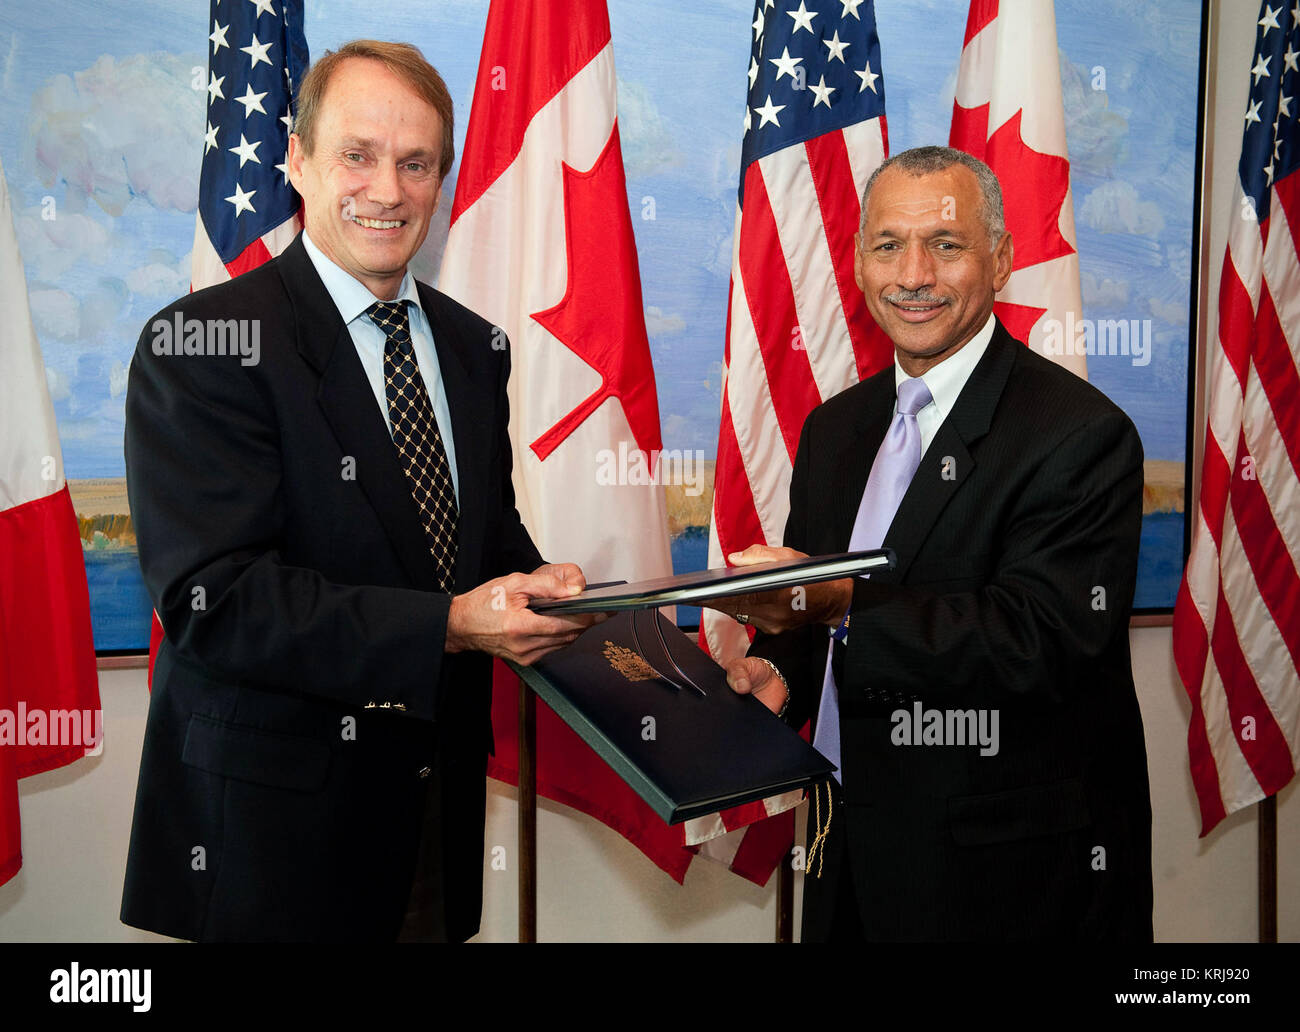 NASA Administrator Charles Bolden, right, and Canadian Space Agency President Steve MacLean signed a framework agreement on civil space cooperation, Wednesday, Sept. 9, 2009, at the Canadian Embassy in Washington, DC.  Photo Credit: (NASA/Bill Ingalls)  NASA Identifier: nasahqphoto-3907836896 NASA Administrator Charles Bolden and Canadian Space Agency President Steve MacLean Stock Photo